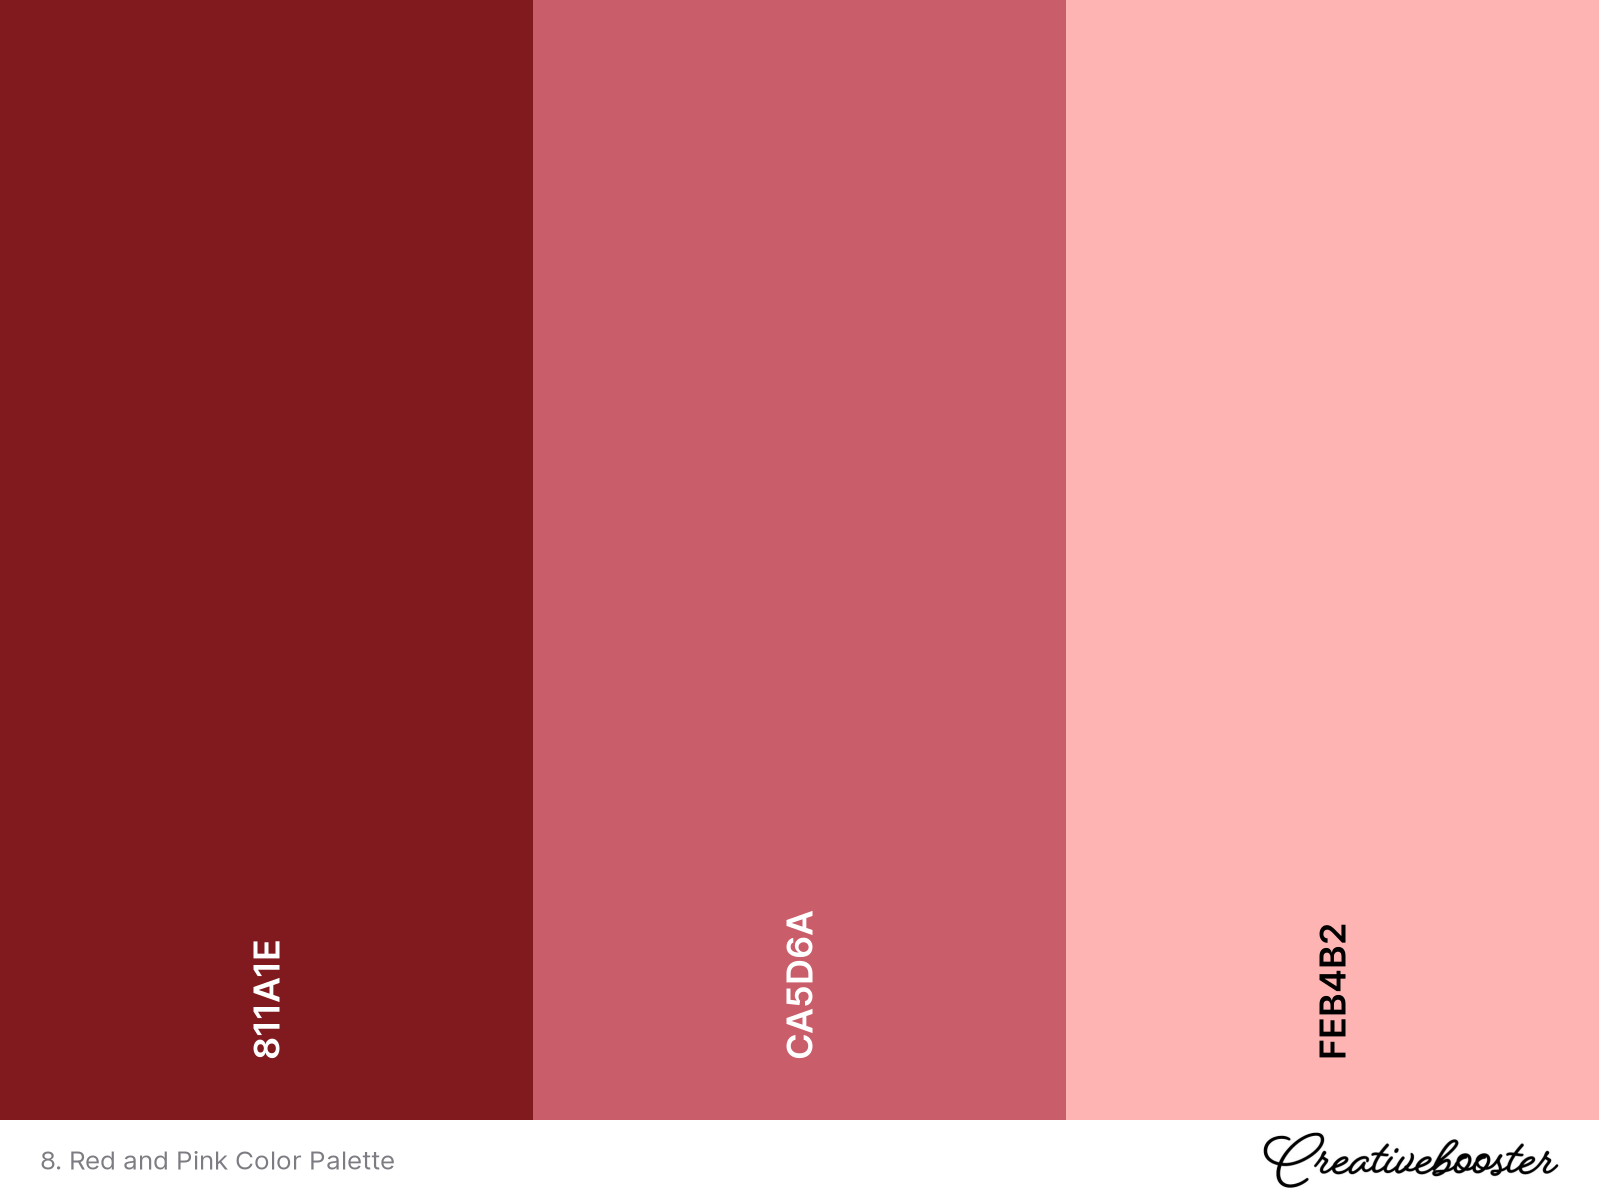 8. Red and Pink Color Palette